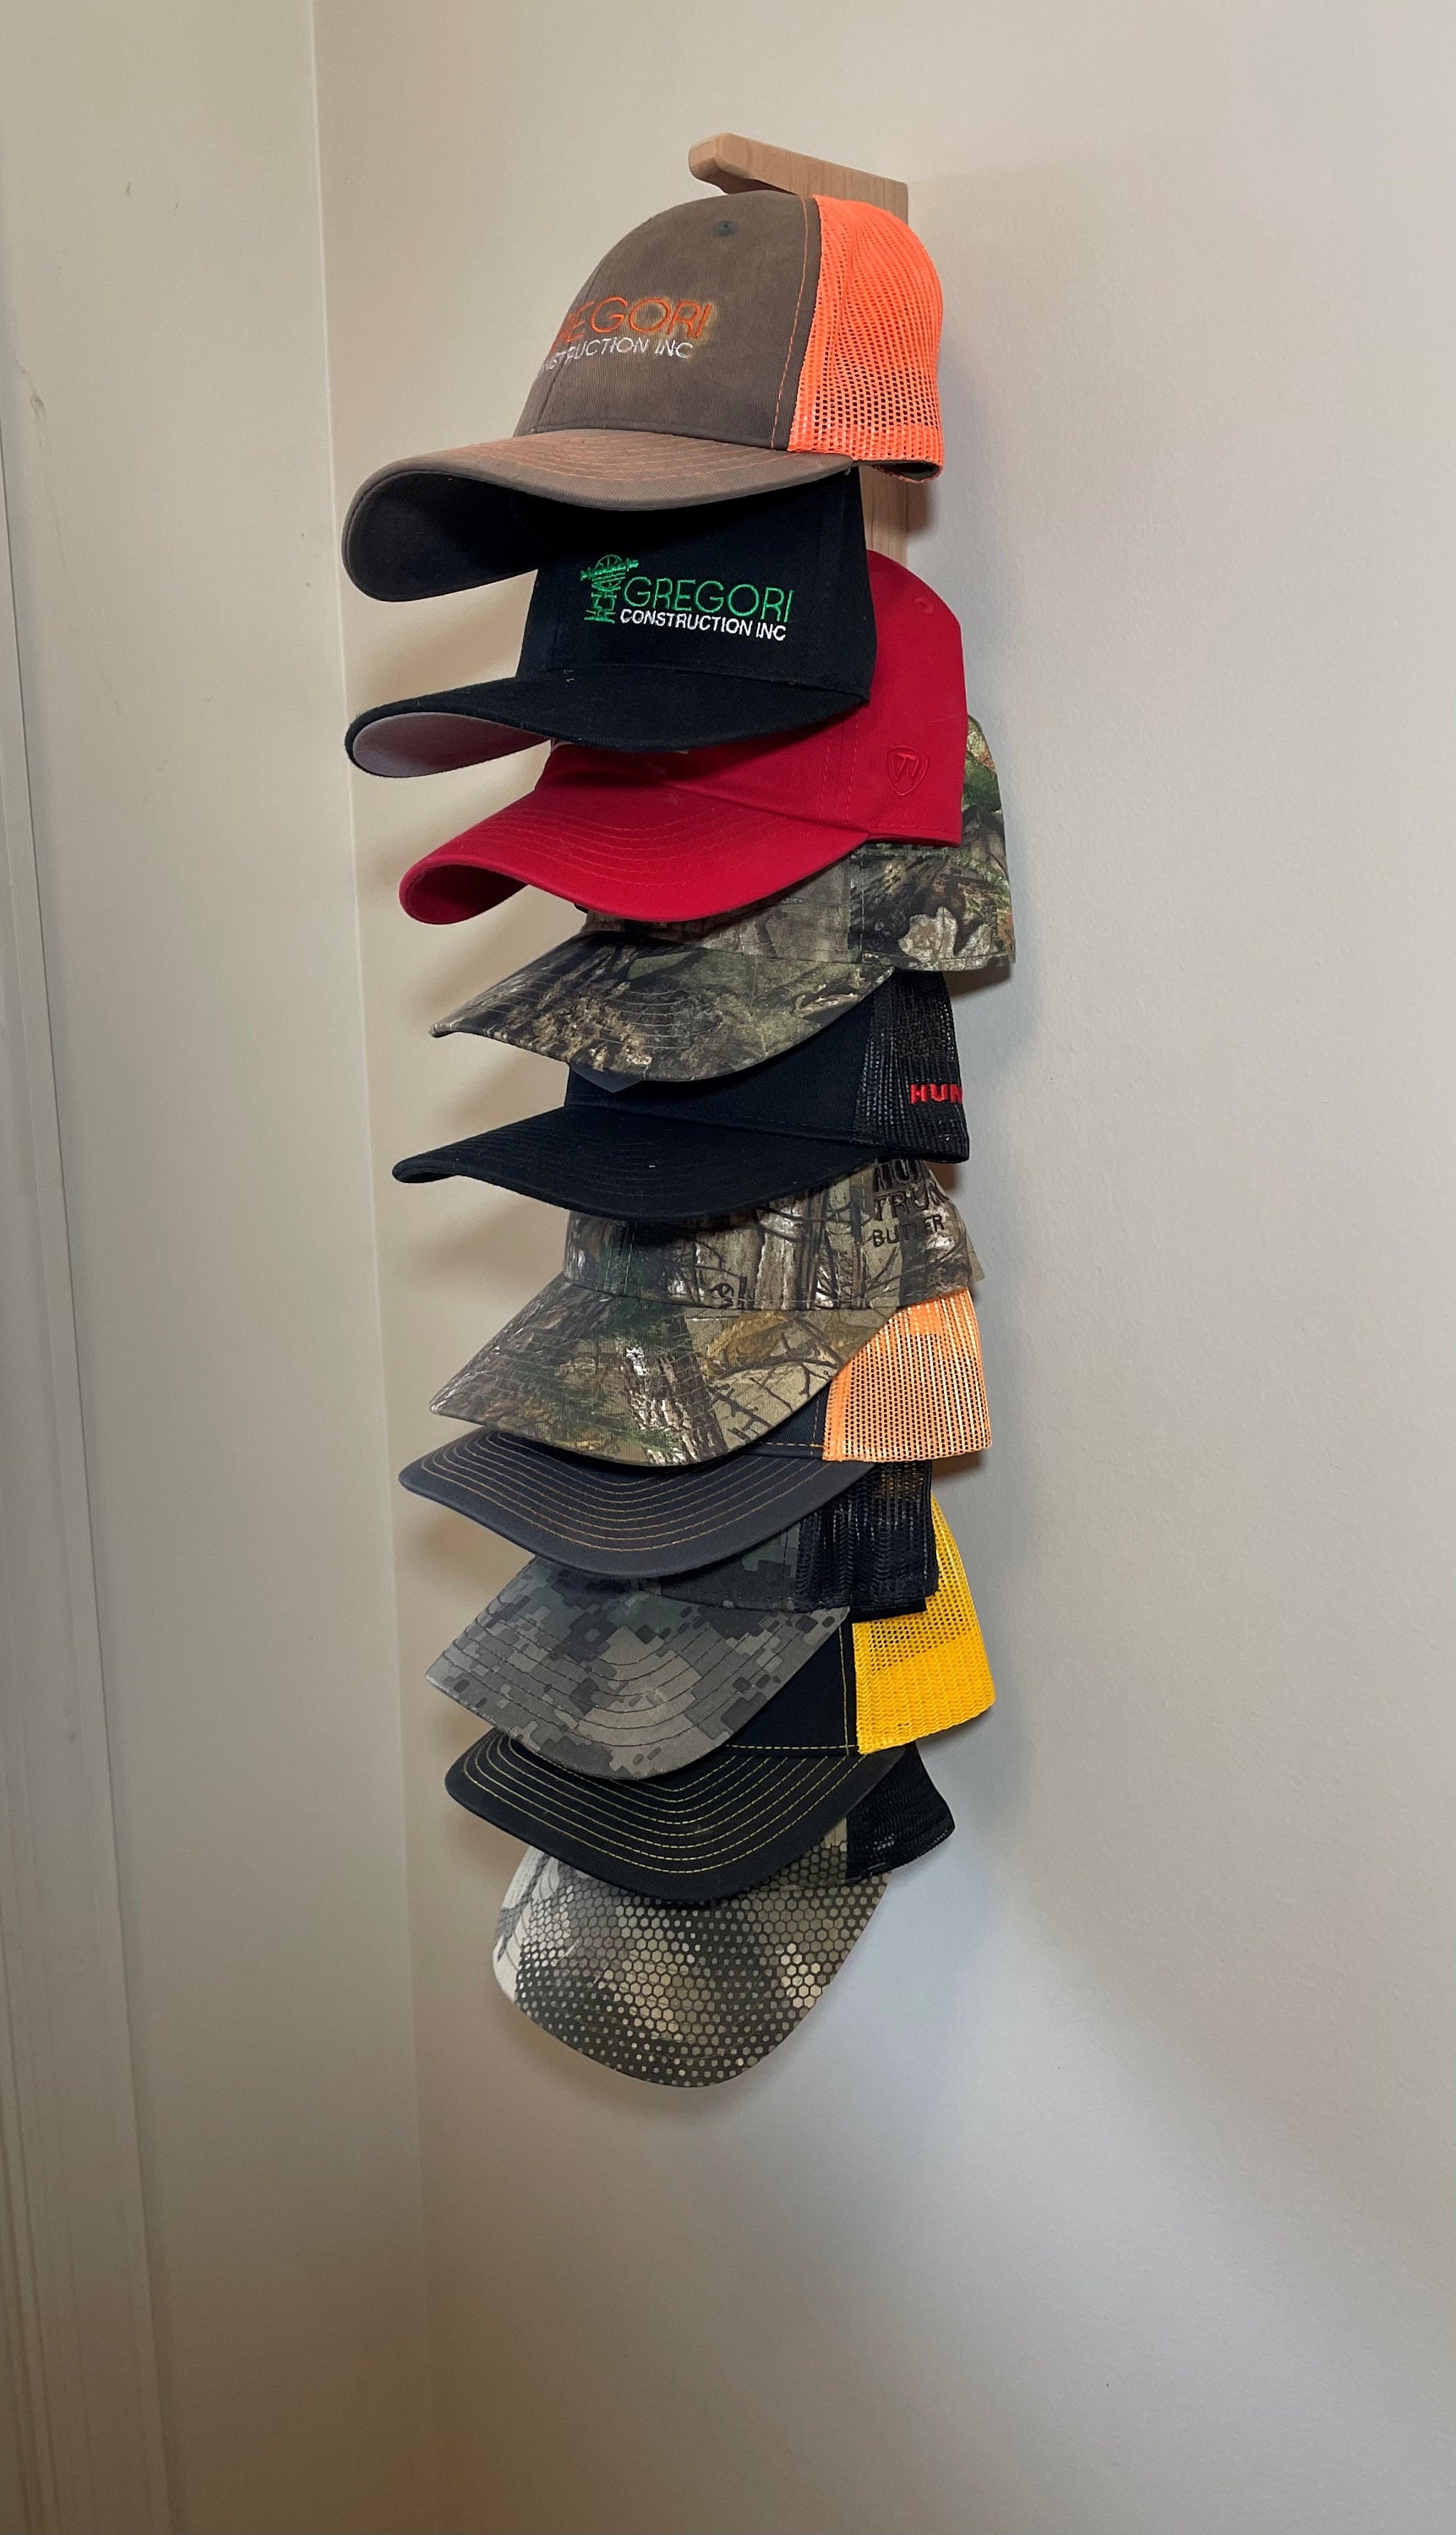 STAUBER Best Acrylic Baseball Cap Rack and Hat Display Holder- Display on  counter in closet or hang on wall.